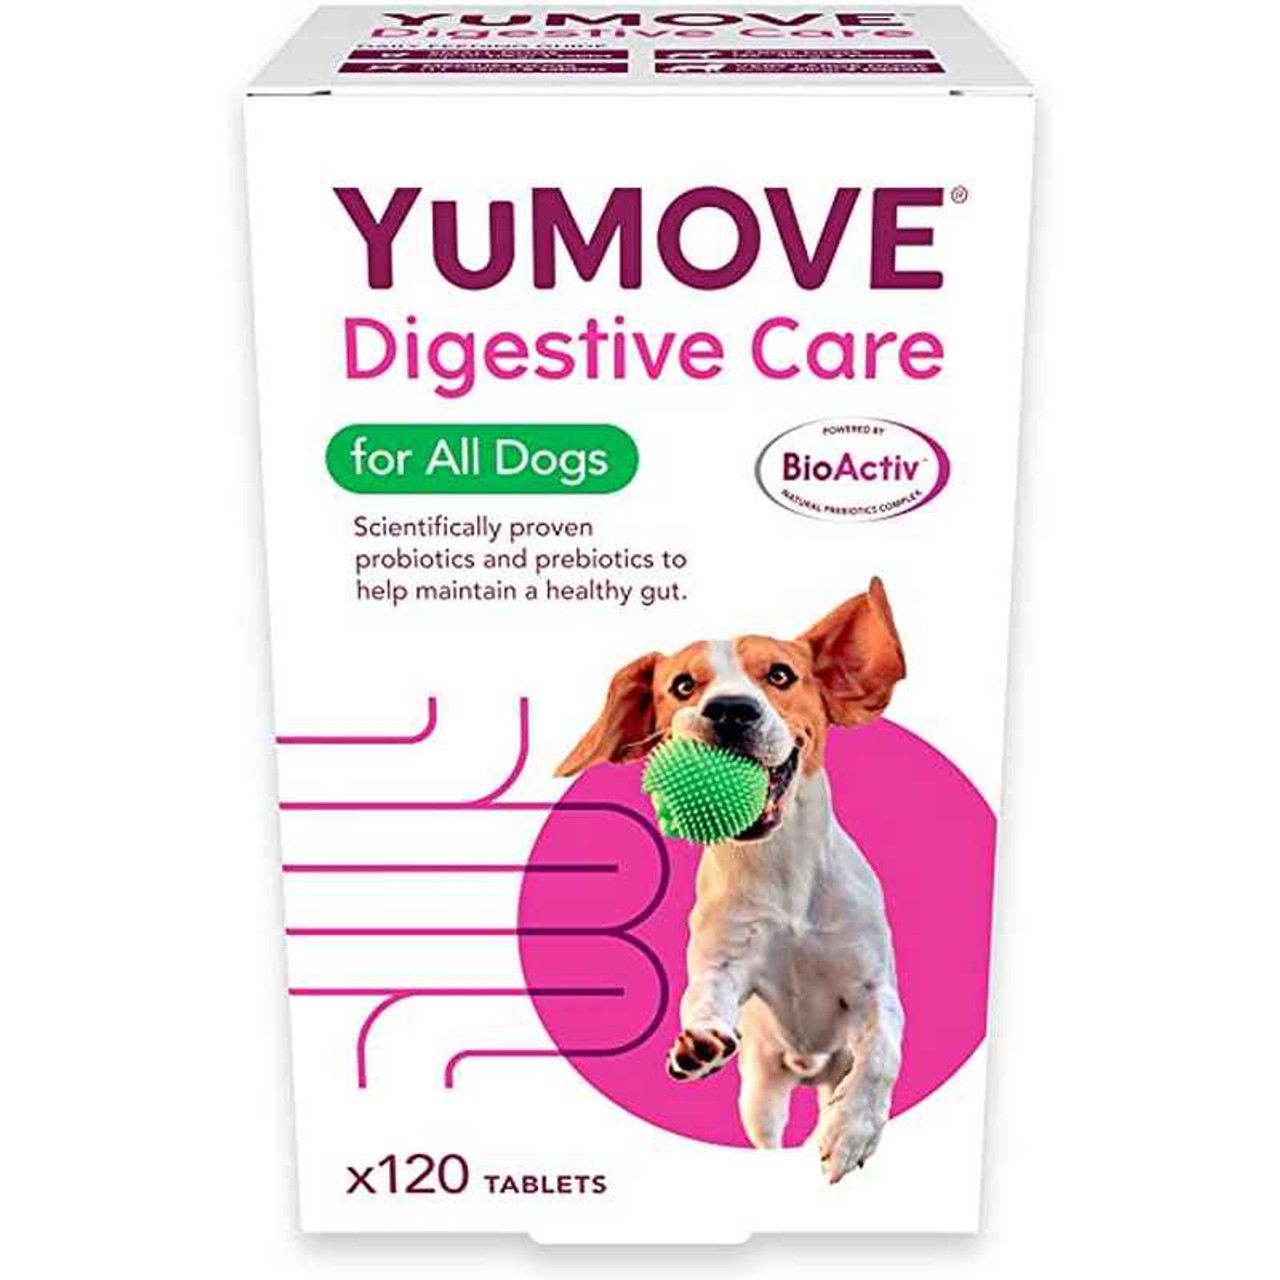 YuMOVE Digestive Care for Dogs